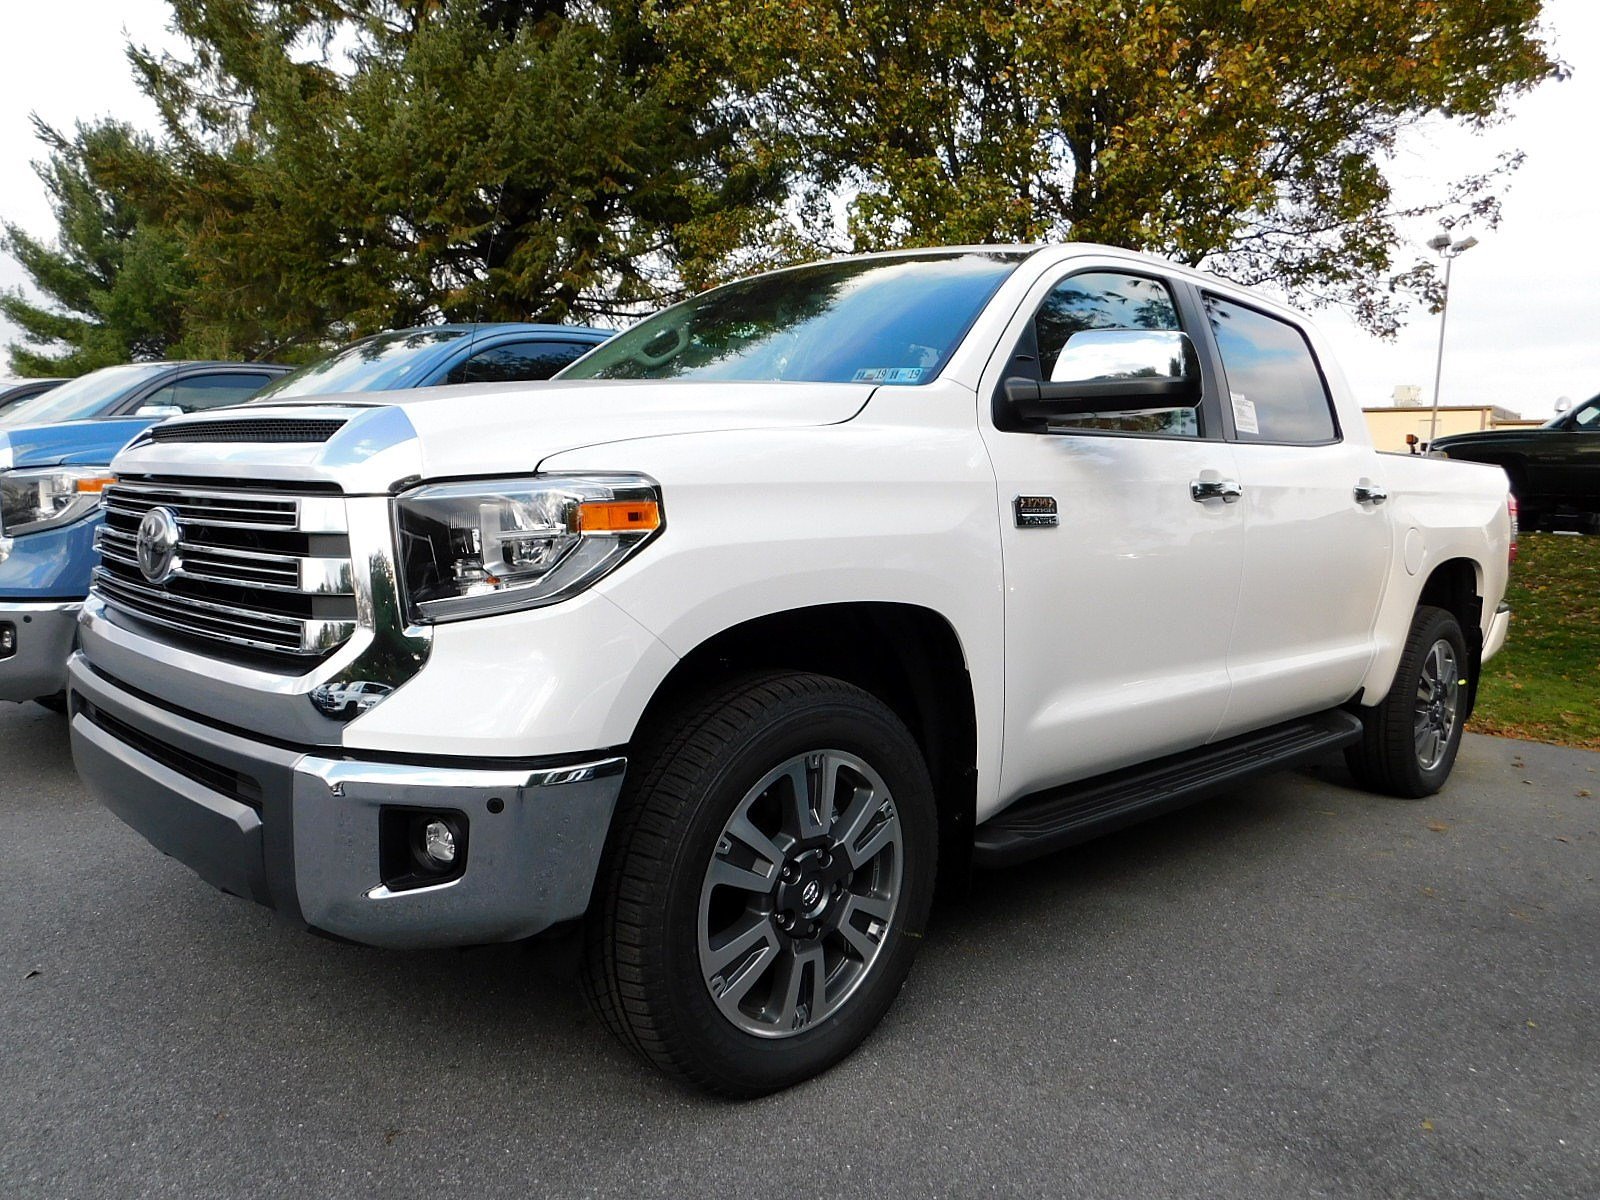 New 2019 Toyota Tundra 1794 Edition CrewMax in East Petersburg #11555